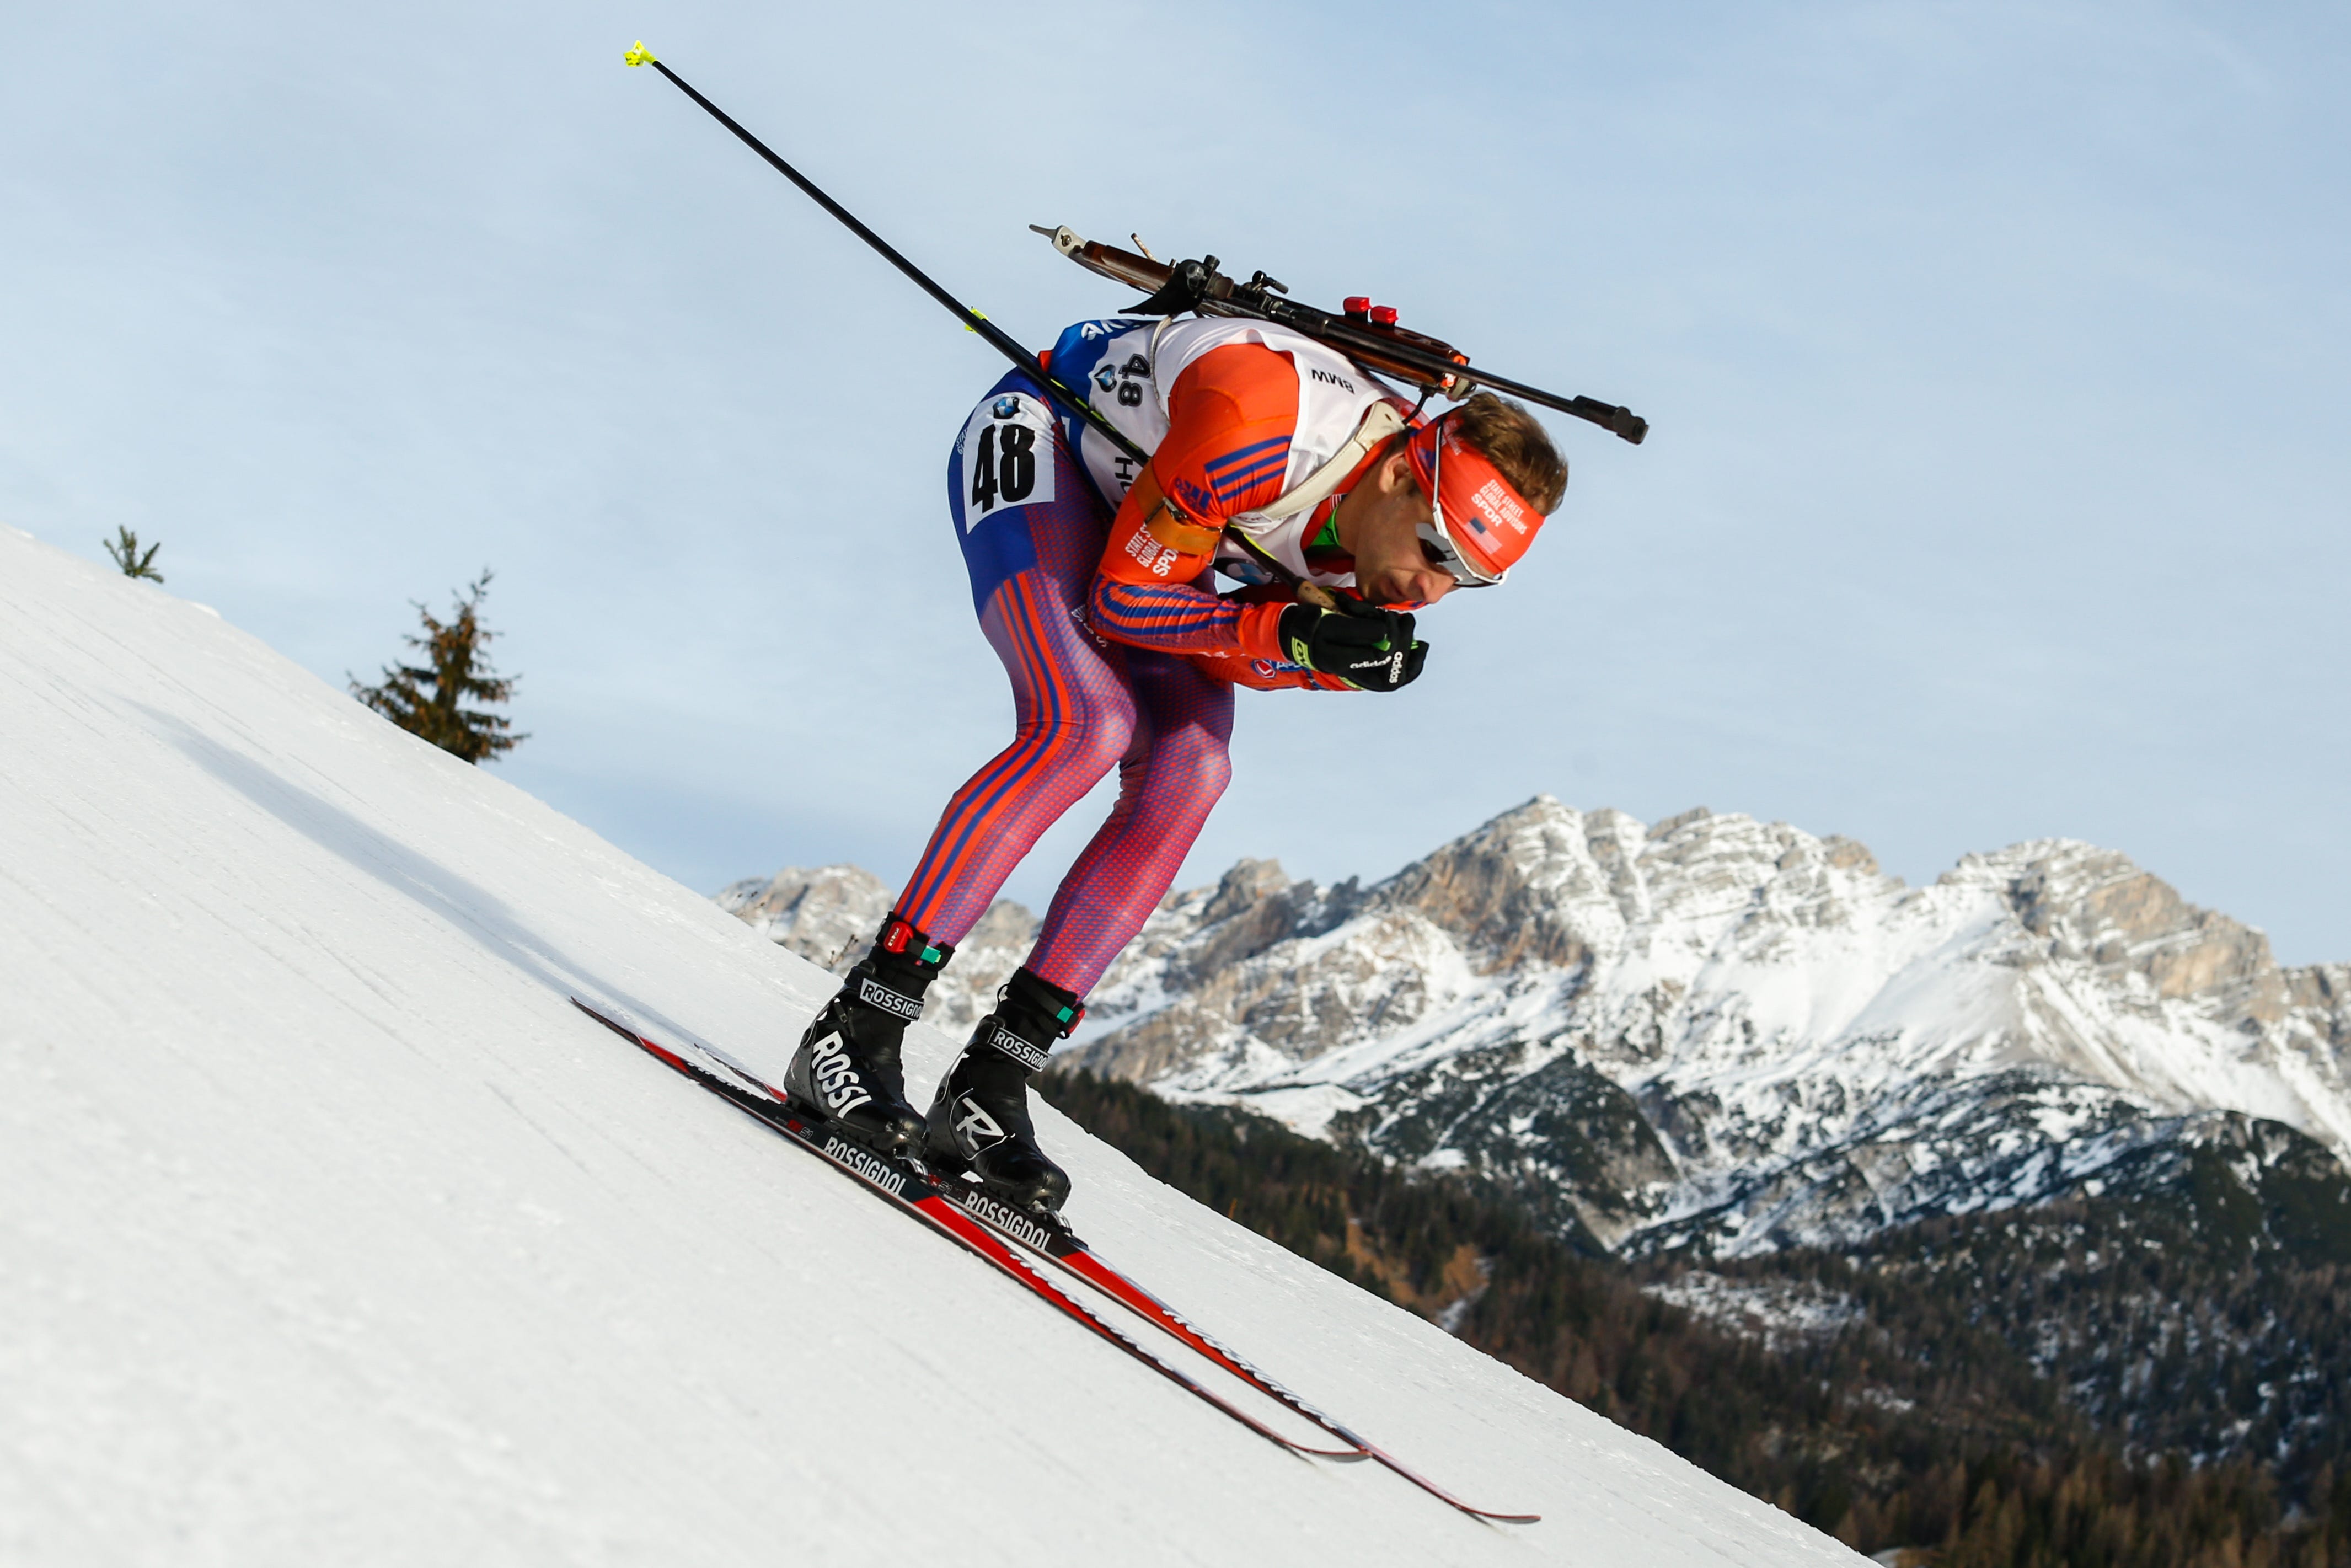 New Paltz skier Nagel a state-title hopeful with Olympic biathlon dreams USA TODAY High School Sports